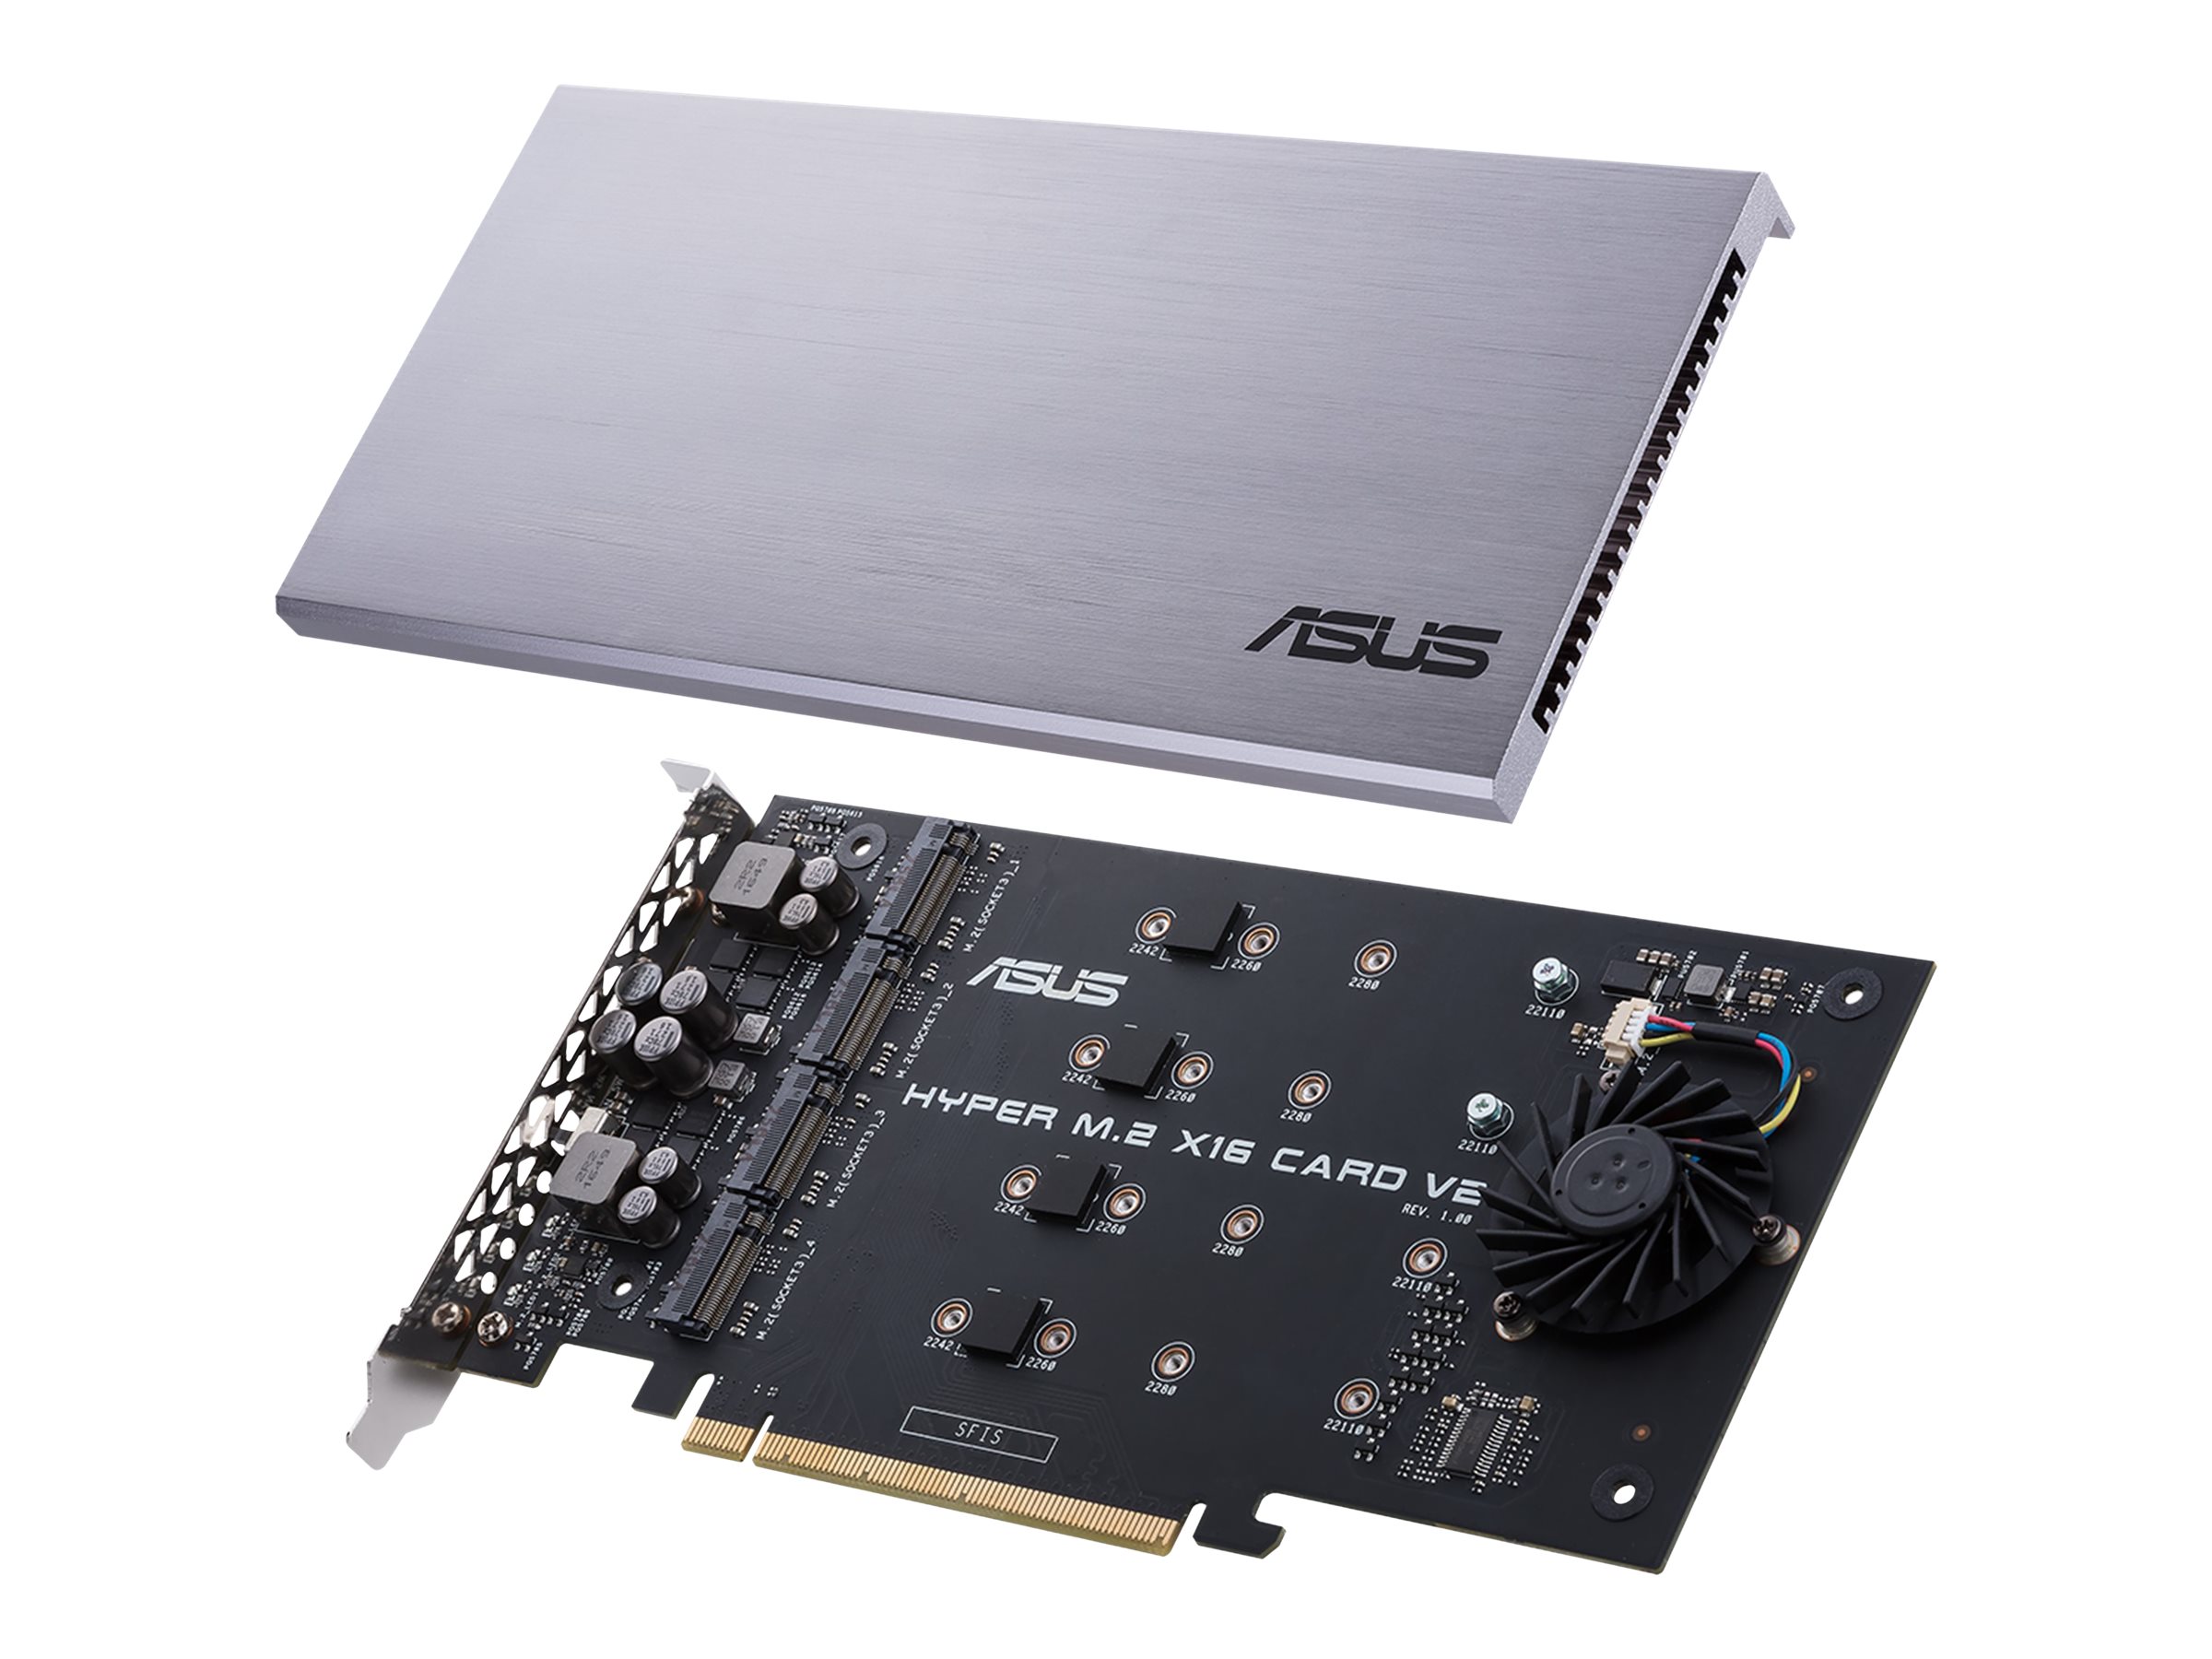 ASUS HYPER M.2 X16 CARD V2 - Schnittstellenadapter - M.2 - Expansion Slot to M.2 - M.2 Card - PCIe 3.0 x16